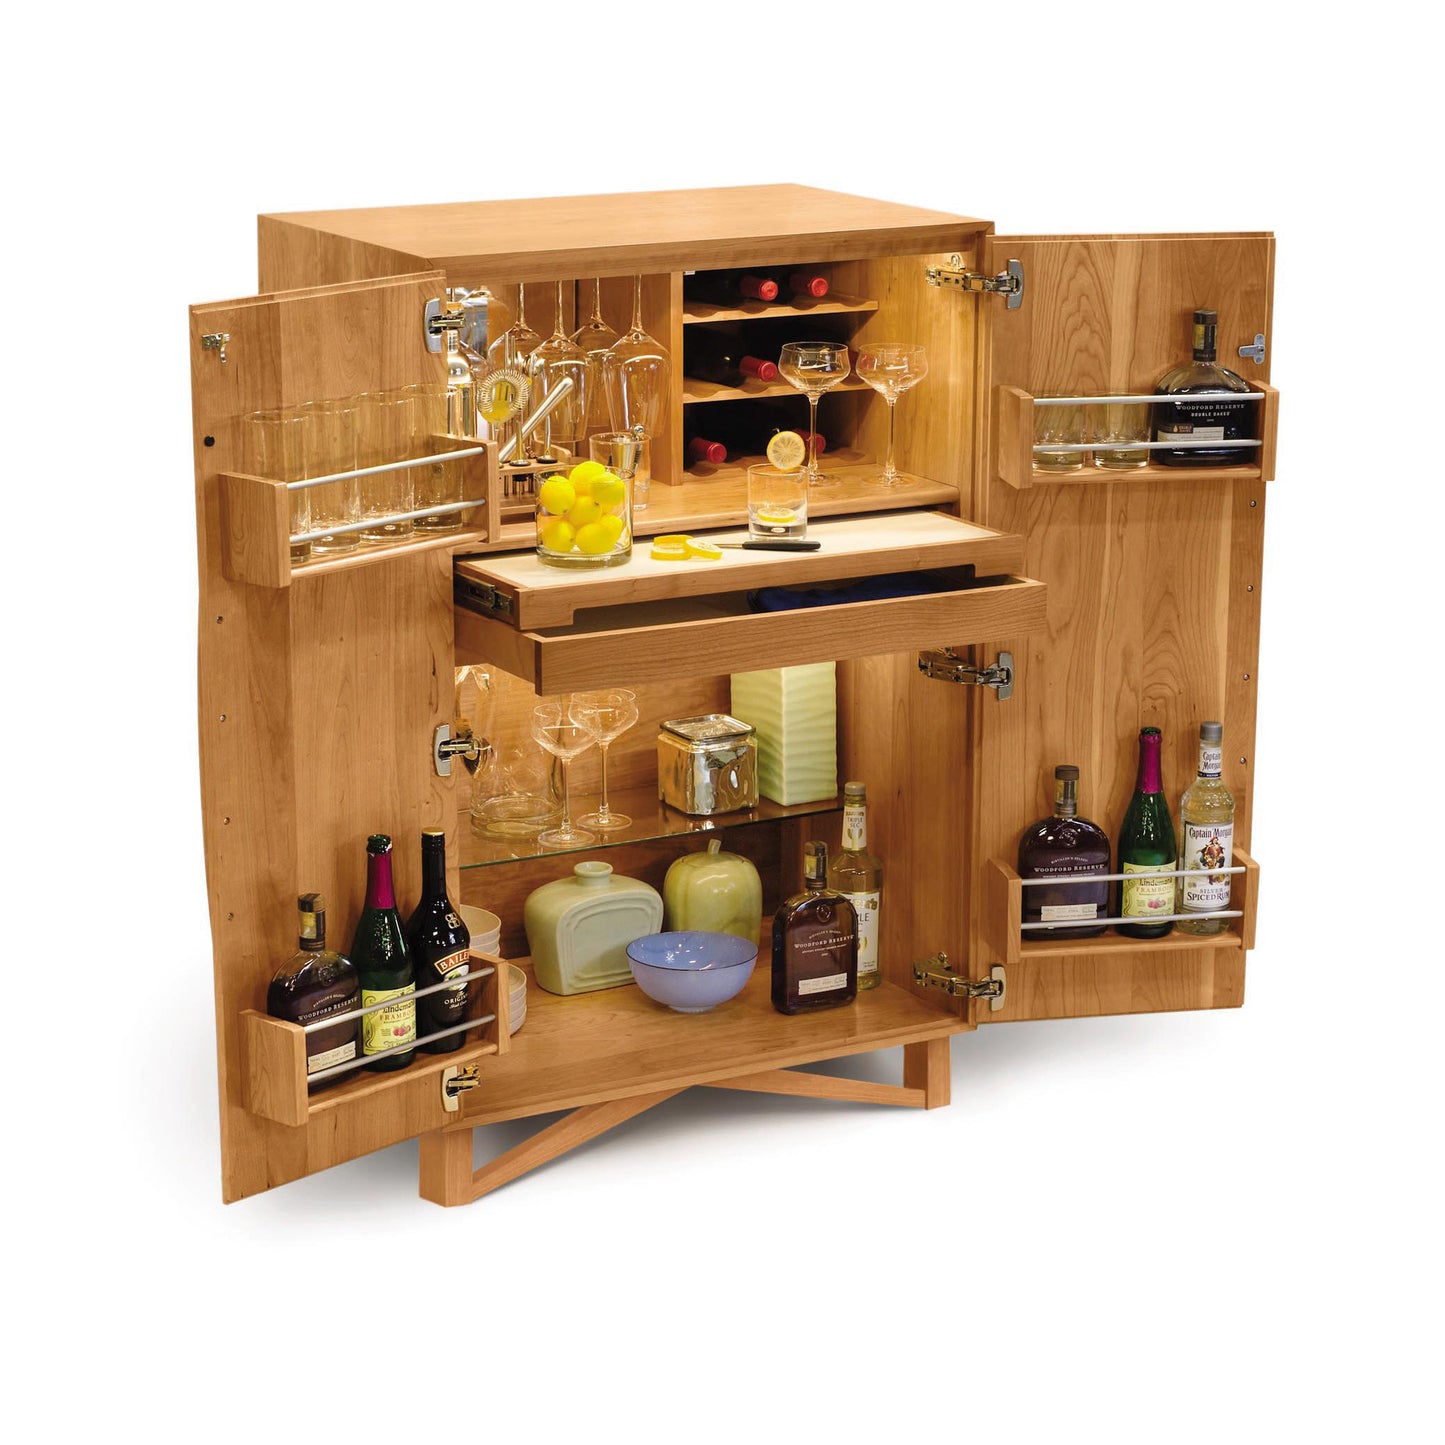 A Copeland Furniture Exeter Bar Cabinet designed as a mid-century modern home bar, with doors open to reveal shelves stocked with various bottles of spirits, glasses, and bar accessories.